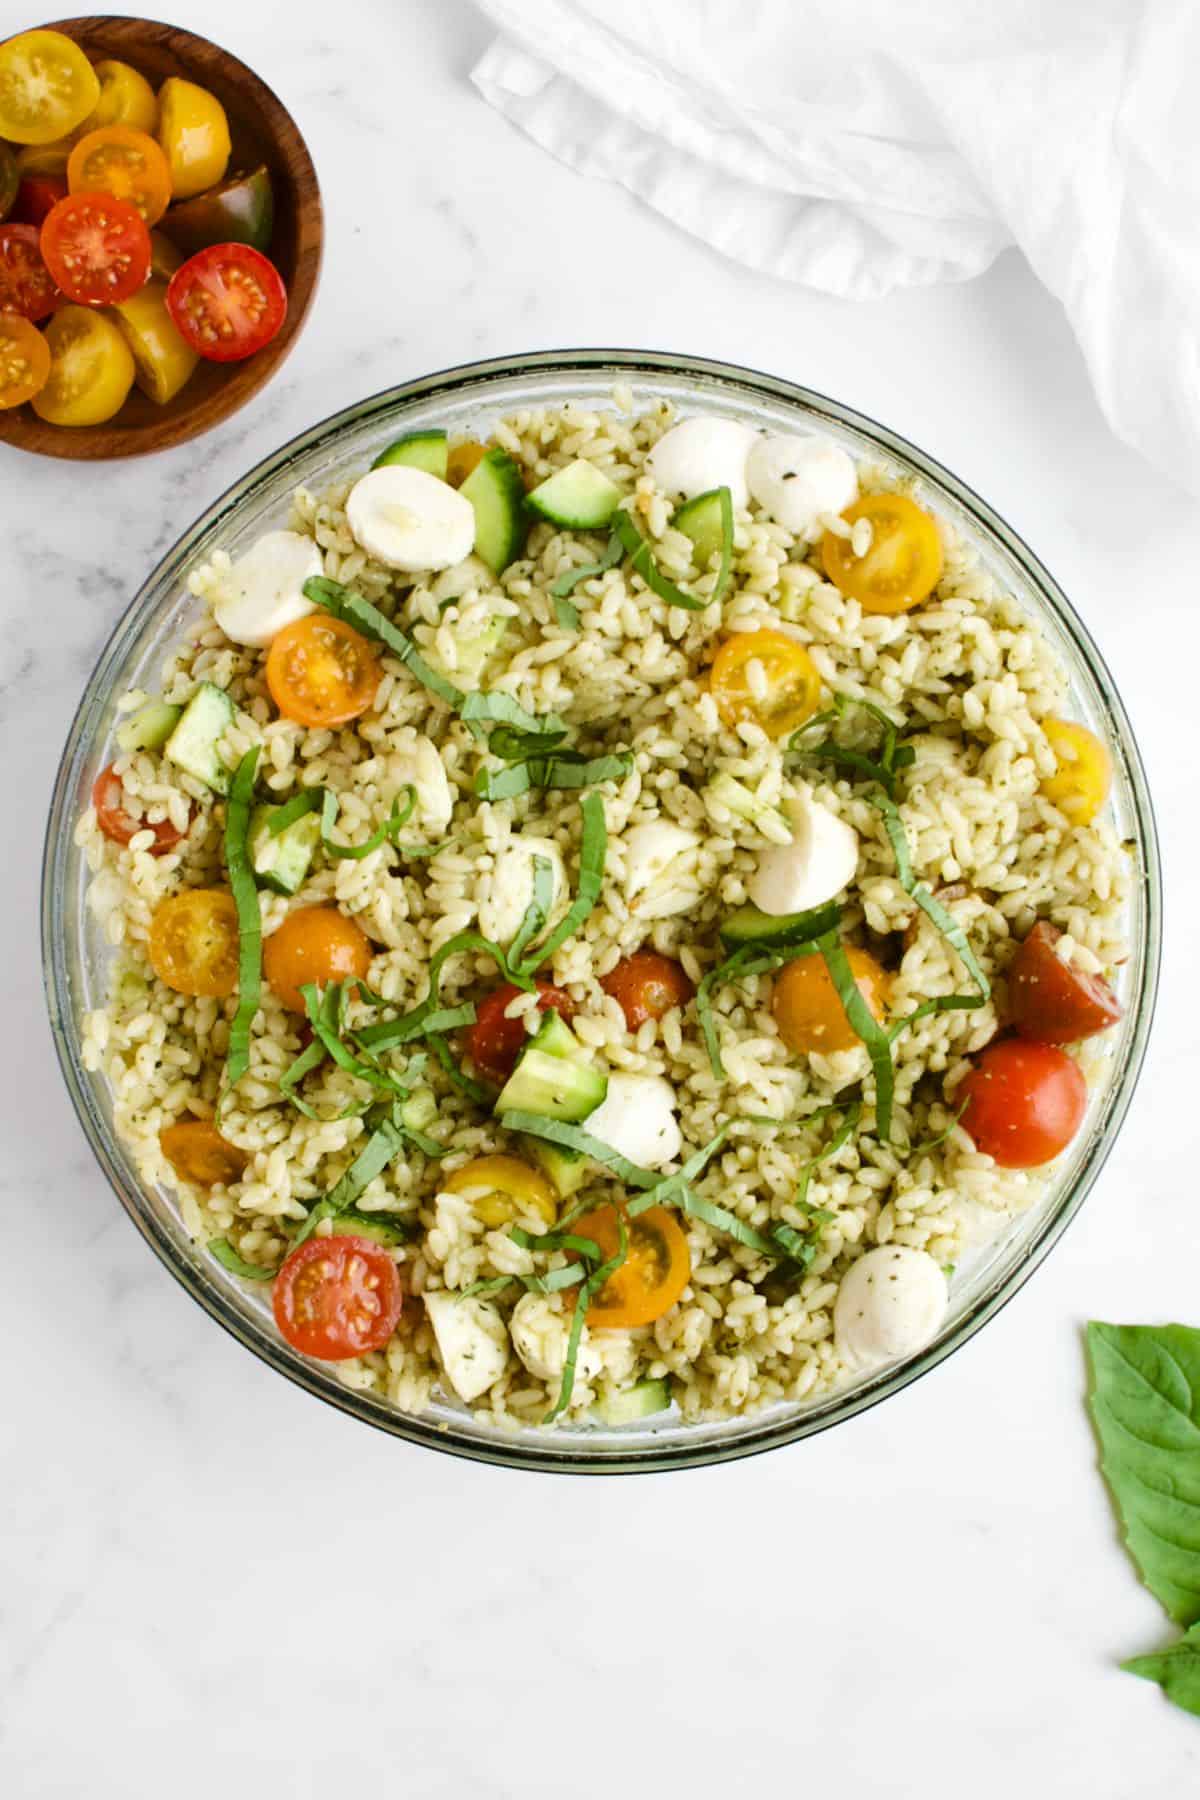 Orzo pesto pasta salad in a glass bowl on a marble background. Leaves of basil and a dish of cherry tomatoes are to the side.